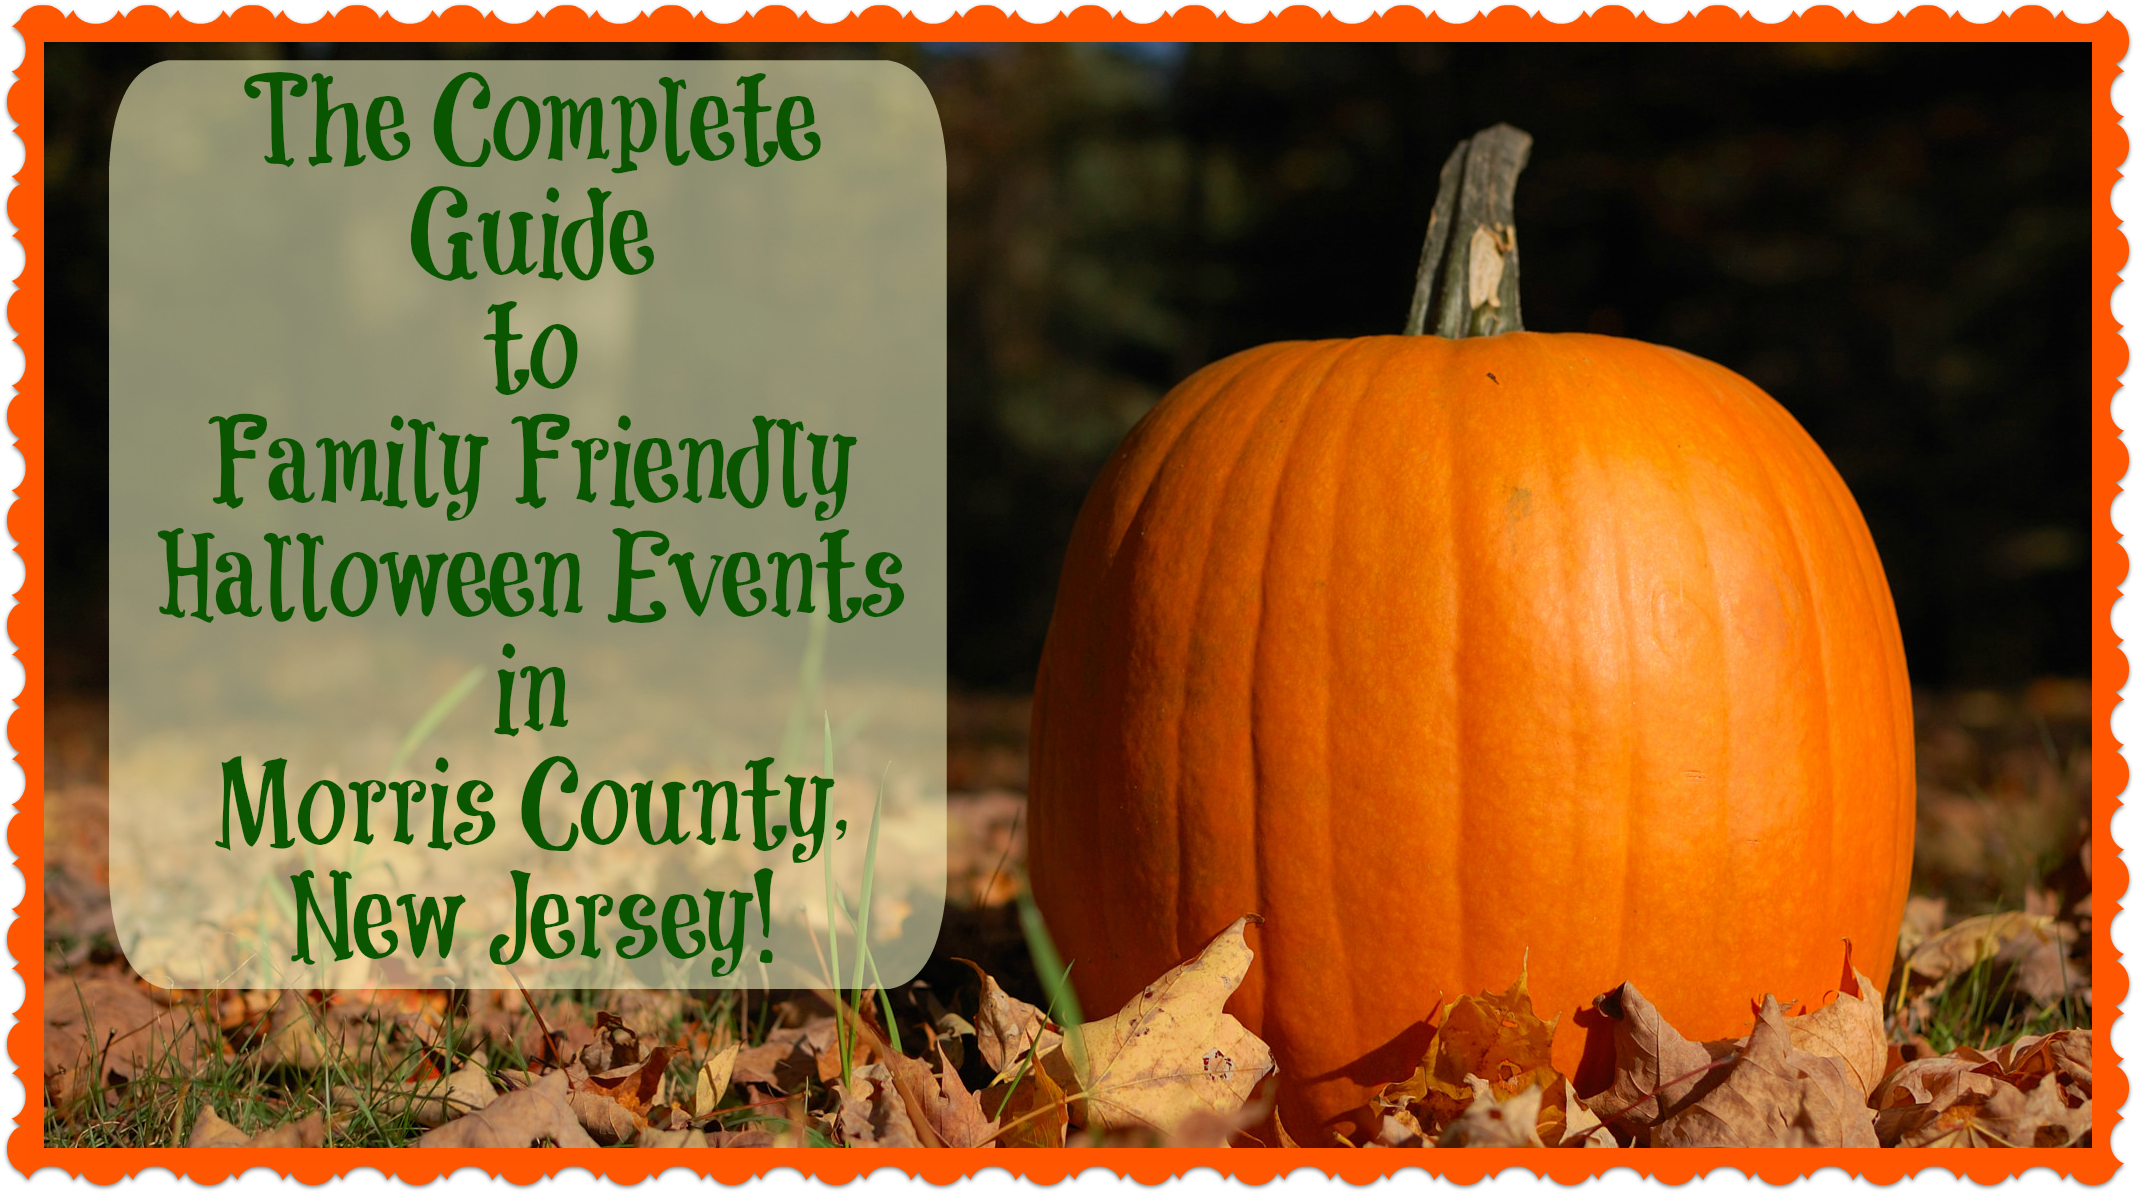 The Complete Guide To Family Friendly Halloween Events in Morris County